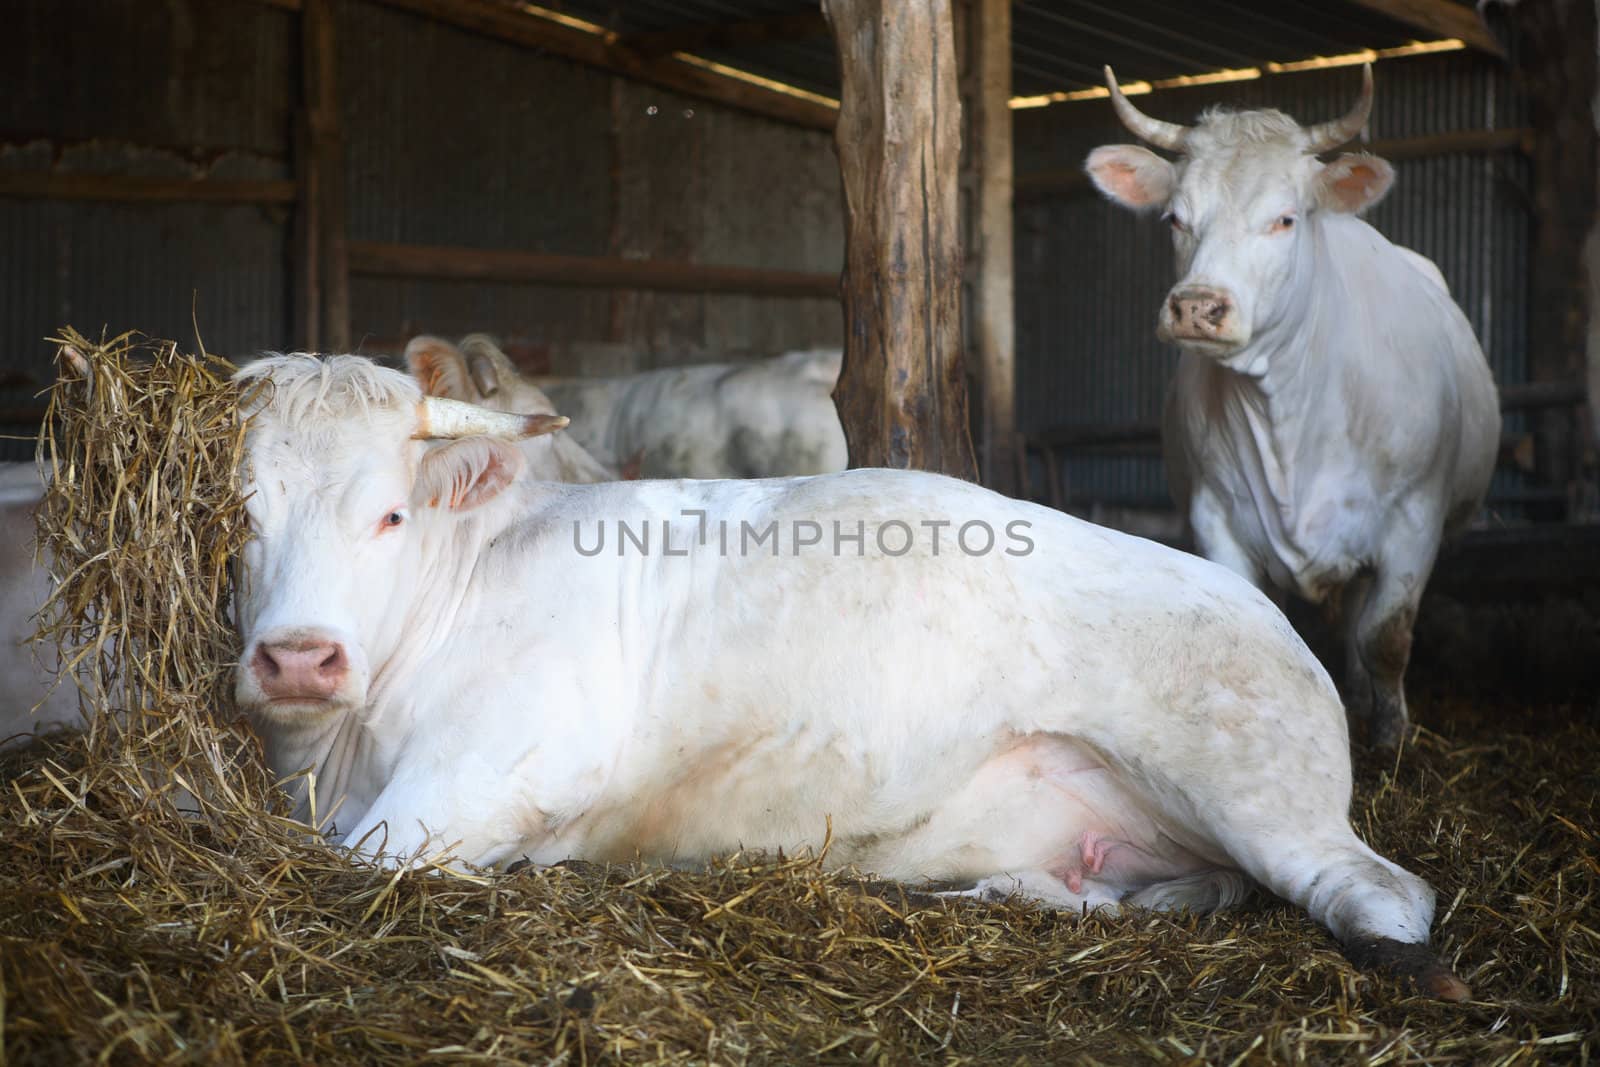 Two white cows in a shed